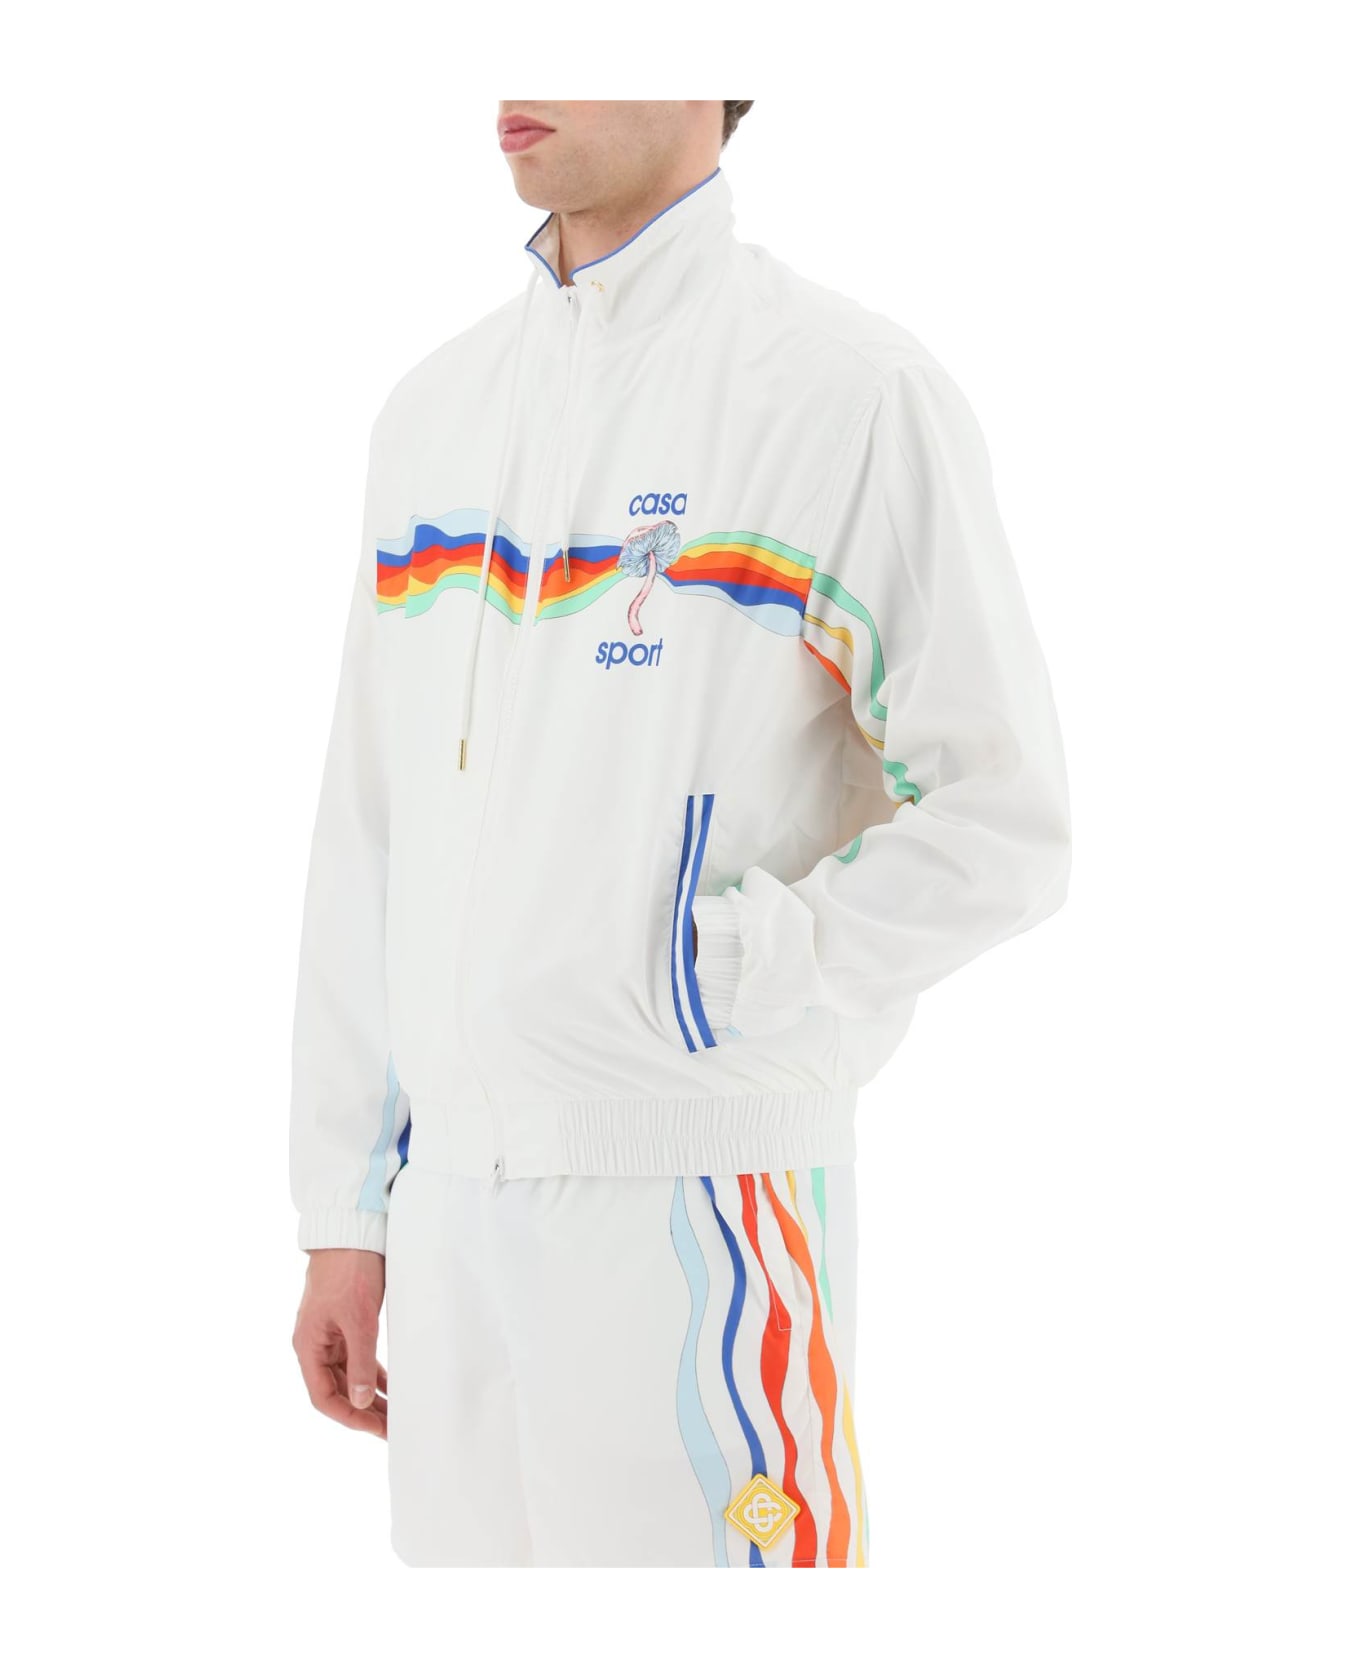 Casablanca Casual Jacket In White Polyester - MIND VIBRATIONS (White) ニットウェア